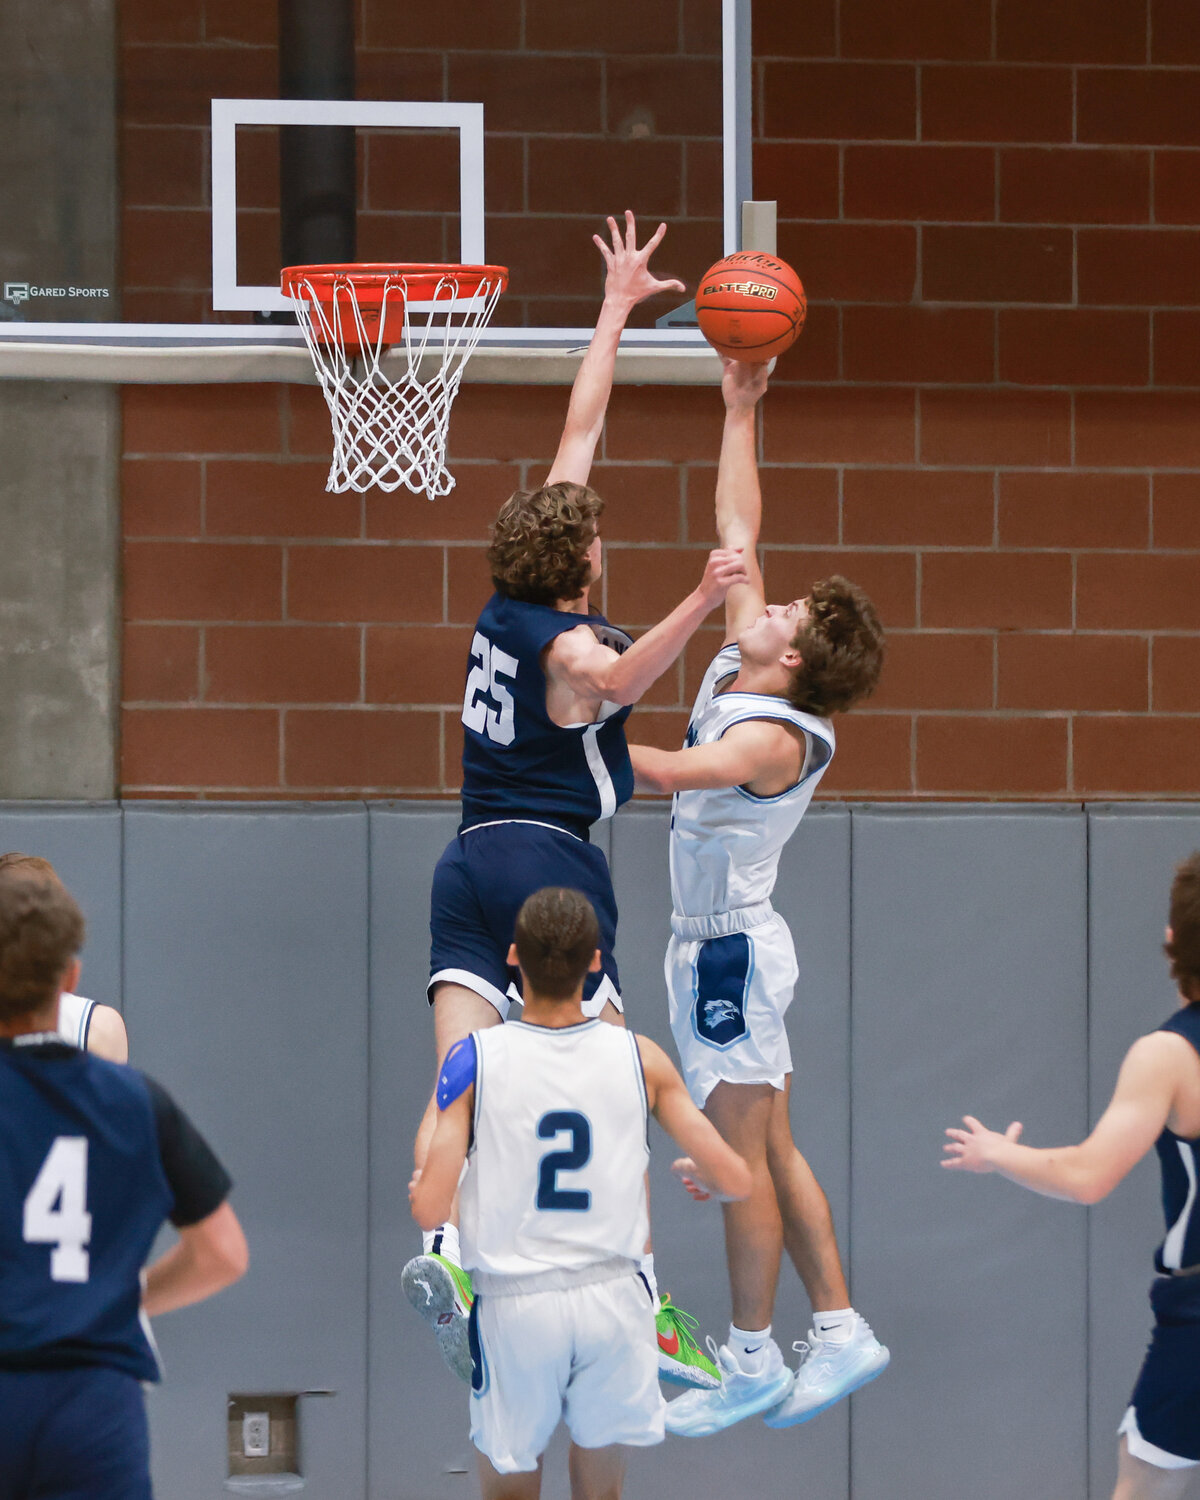 Tenison Woods’ Jackson Bowden blocks a shot during the game between the Hockinson Hawks and the Tenison Woods Titans from Mount Gambier, Australia, on Thursday, Nov. 30. 